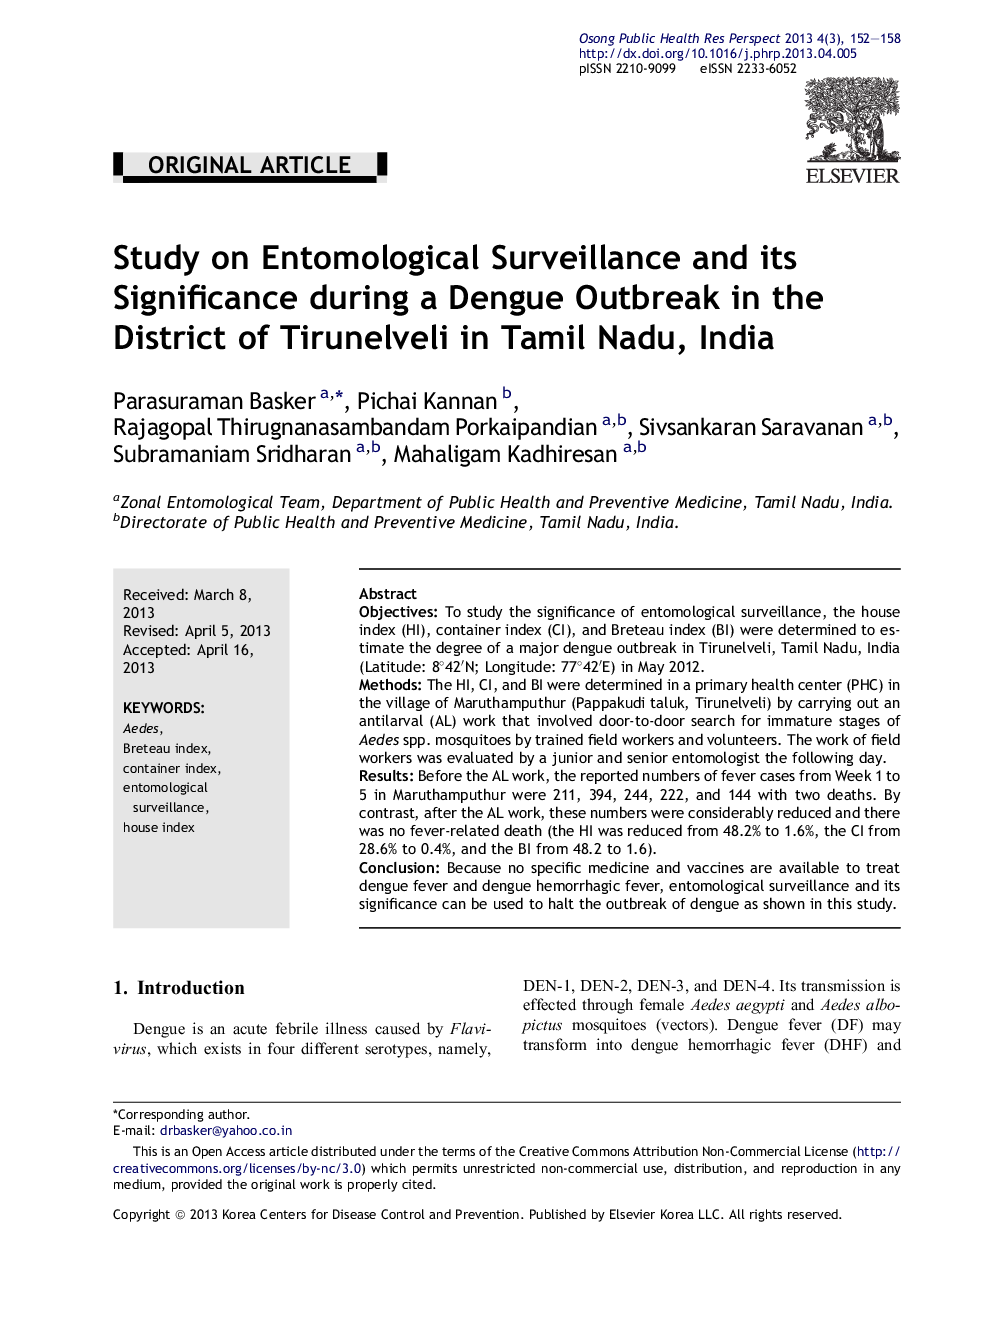 Study on Entomological Surveillance and its Significance during a Dengue Outbreak in the District of Tirunelveli in Tamil Nadu, India 